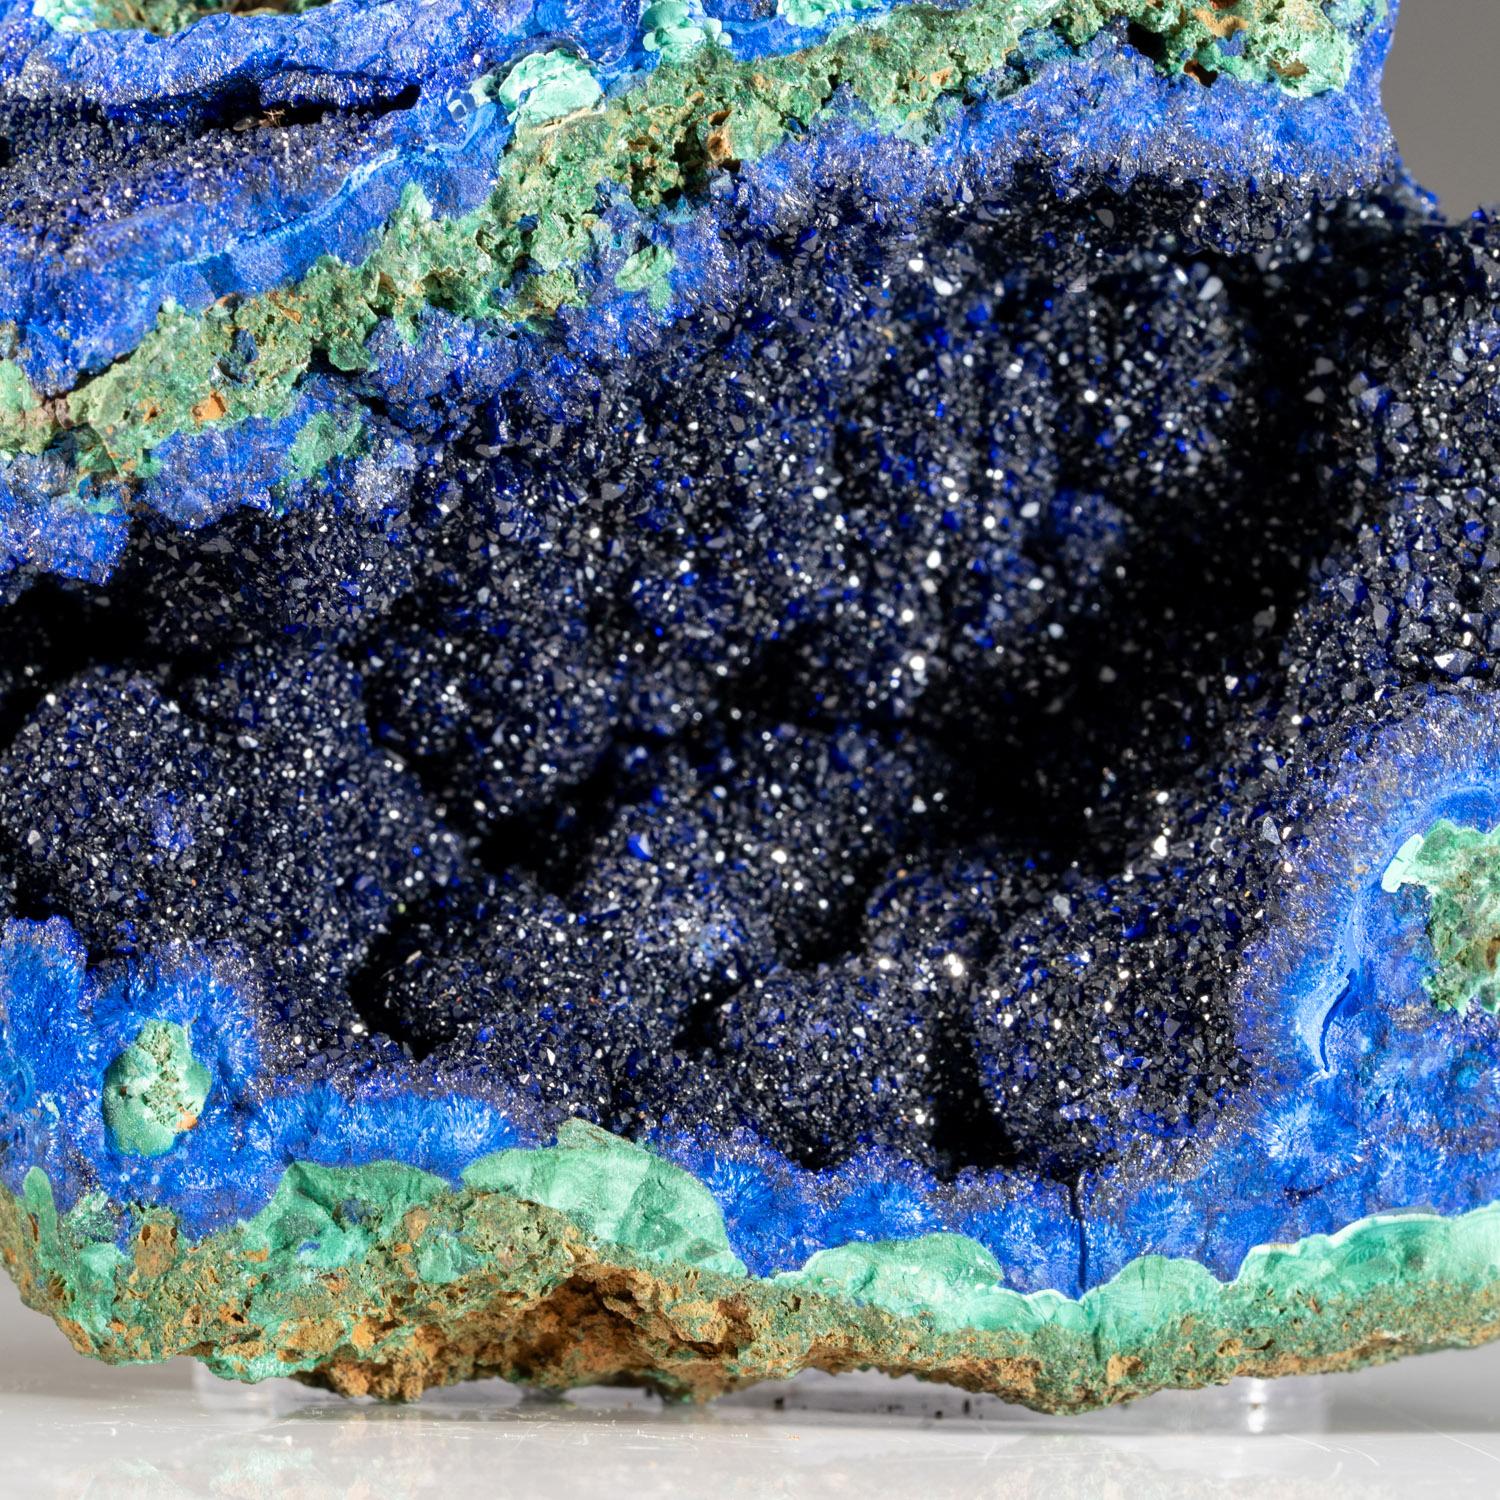 From Tongshankou Mine, Daye, Huangshi, Hubei, China

Lustrous transparent dark-blue azurite crystals on limonite matrix enriched with vibrant green fibrous malachite crystals.The azurite crystals are fully terminated with highly reflect crystal